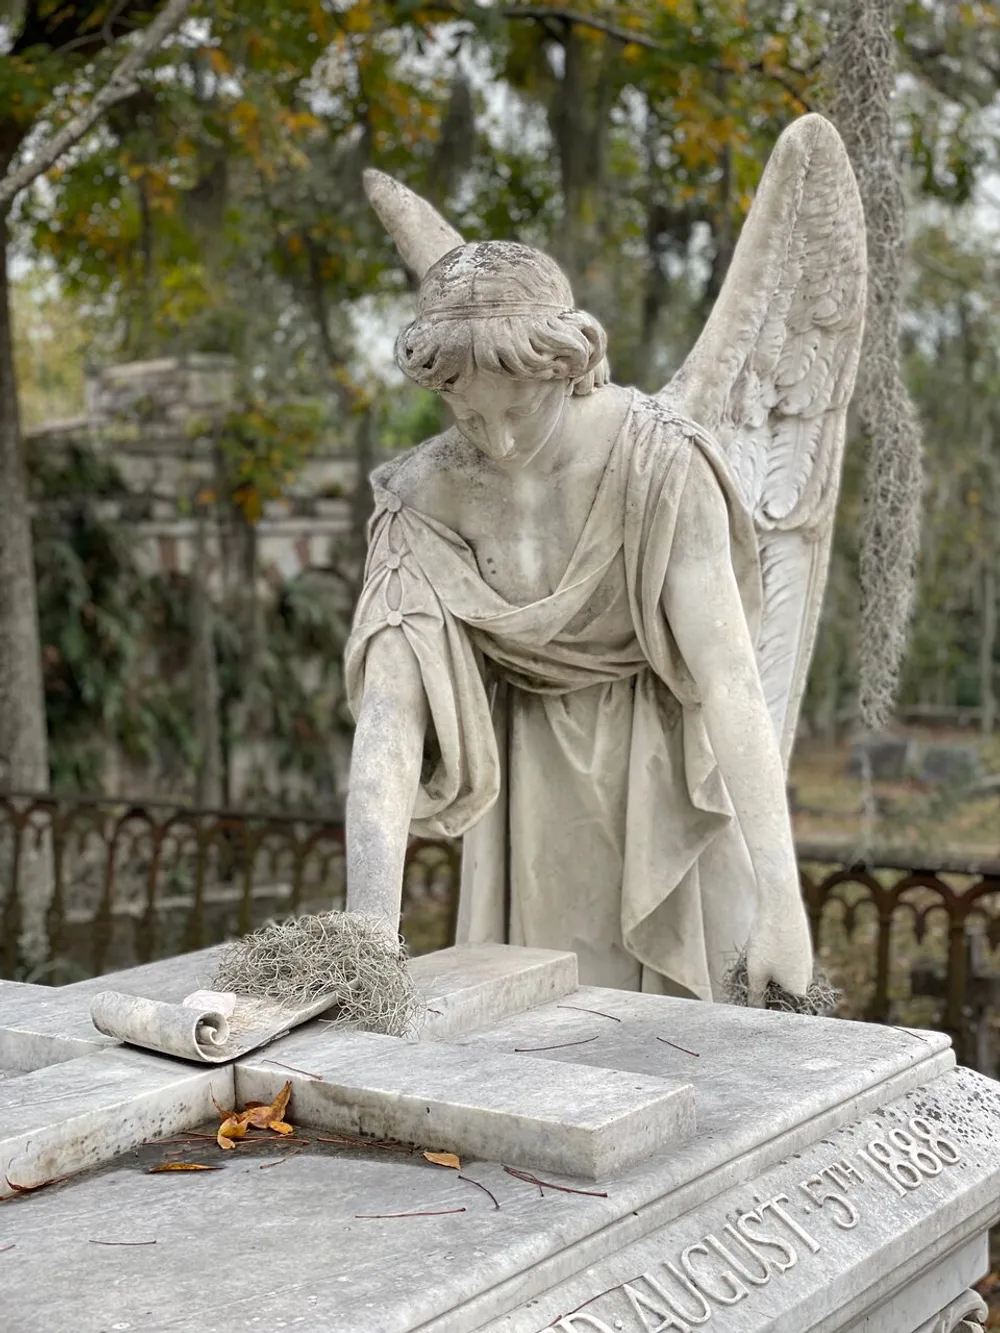 The image shows a weathered stone statue of an angel leaning sorrowfully over a tombstone with Spanish moss and Autumn leaves adding to the serene yet somber atmosphere of a cemetery